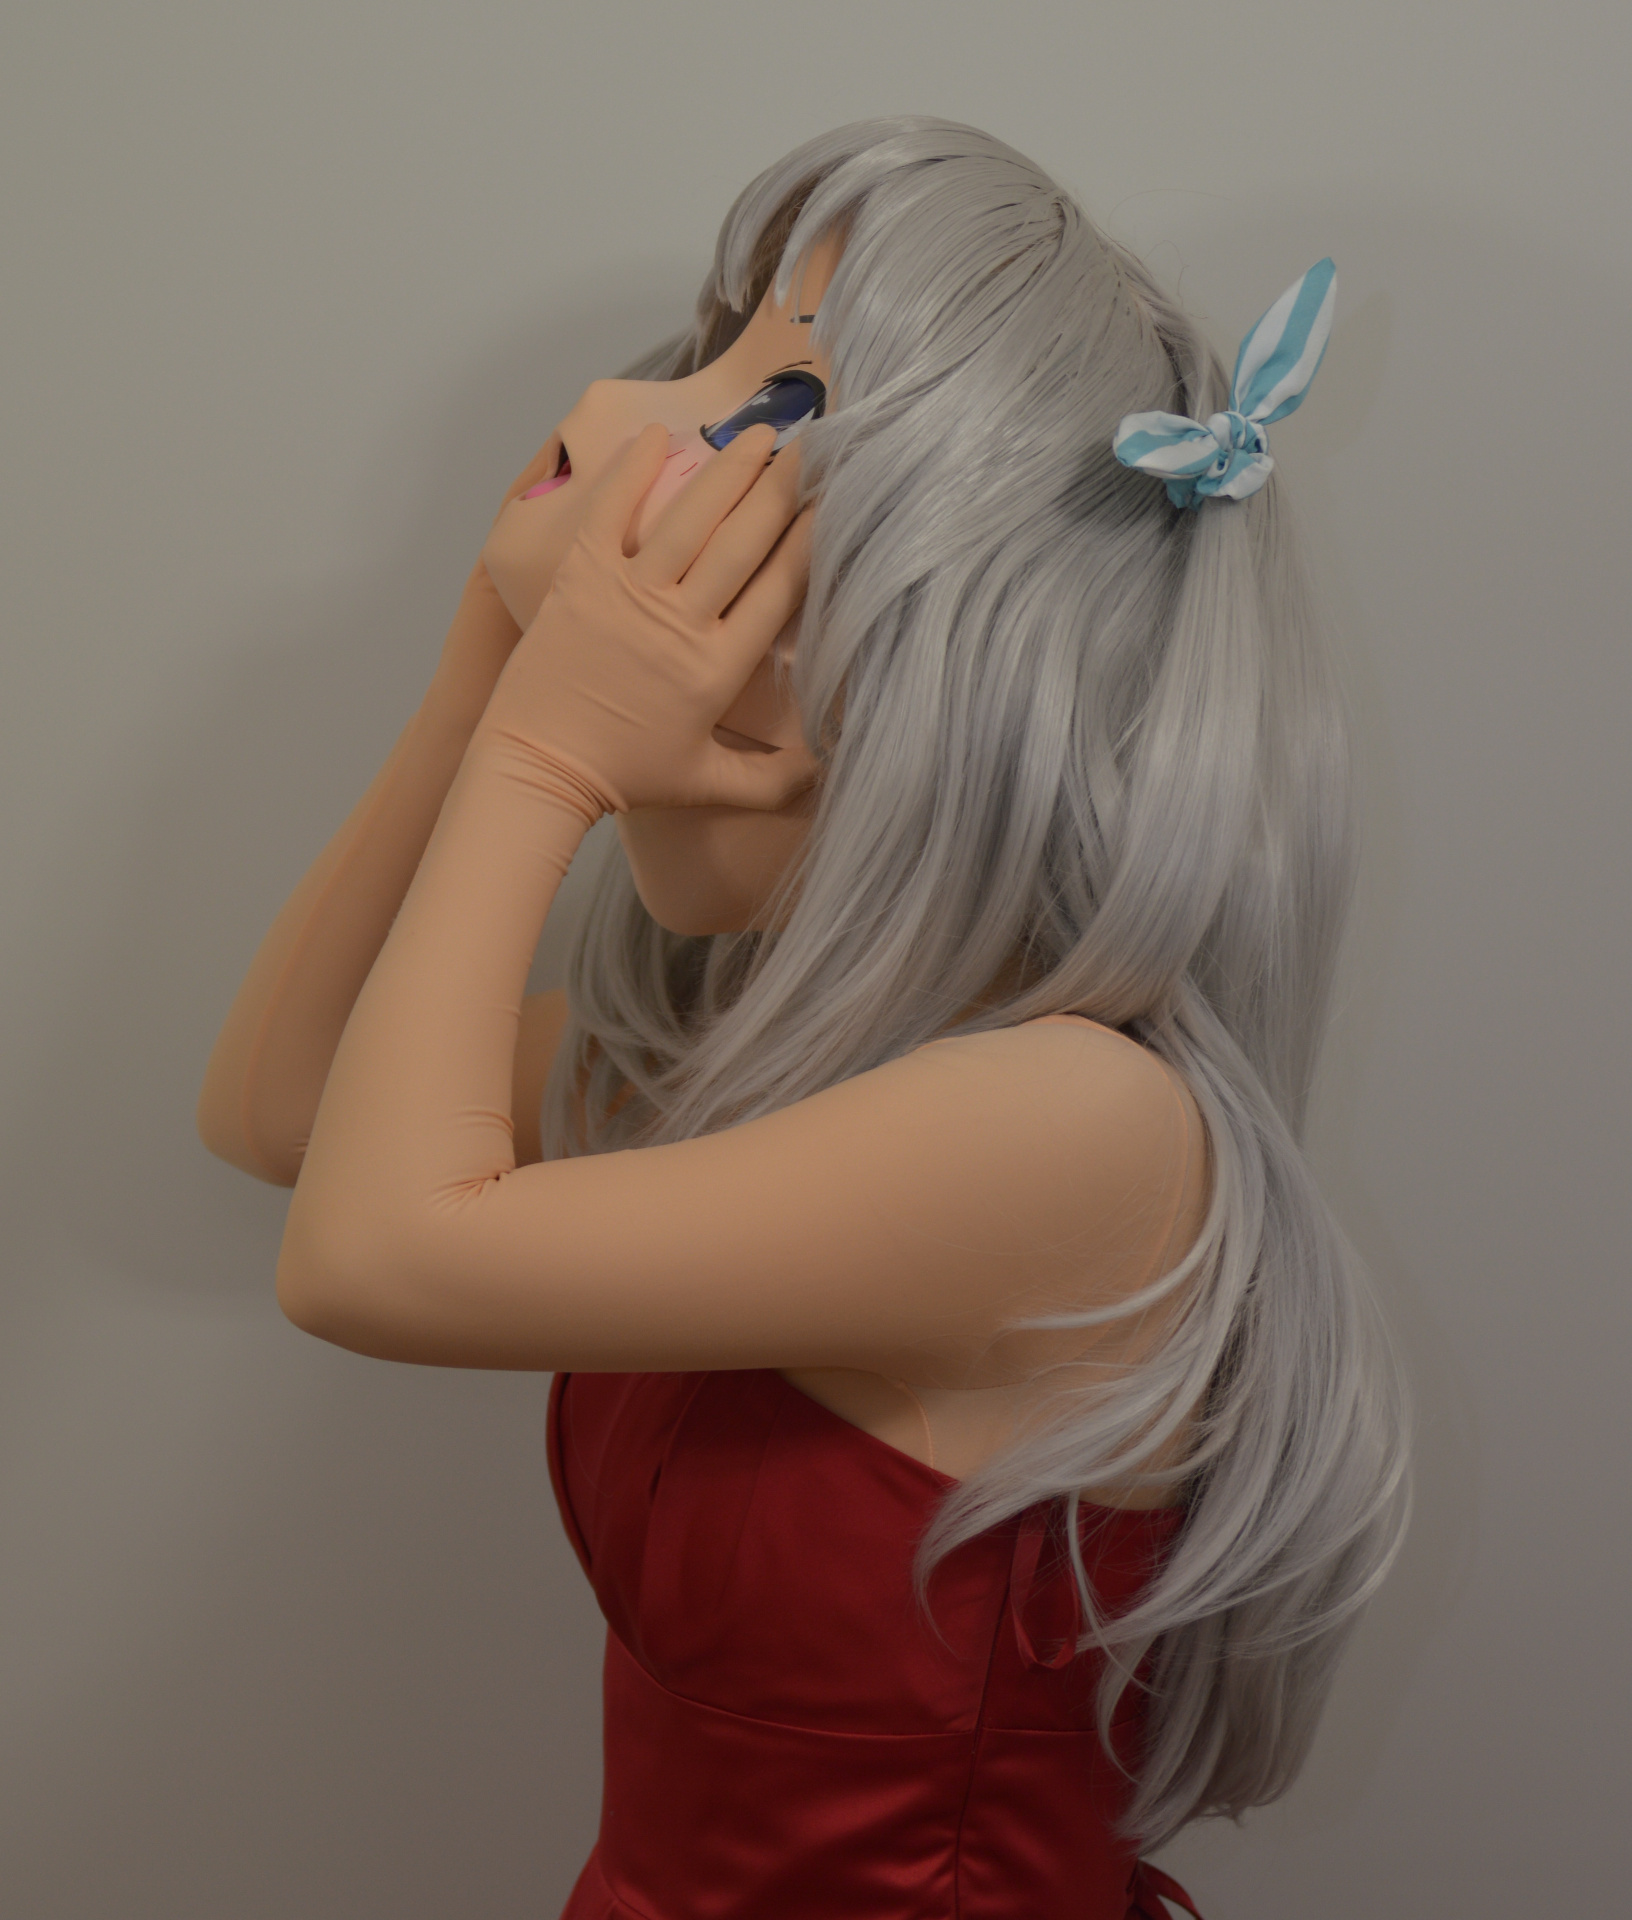 How to wear our mask｜beginner｜AYAME STORE : animegao kigurumi mask - MADE JAPAN.